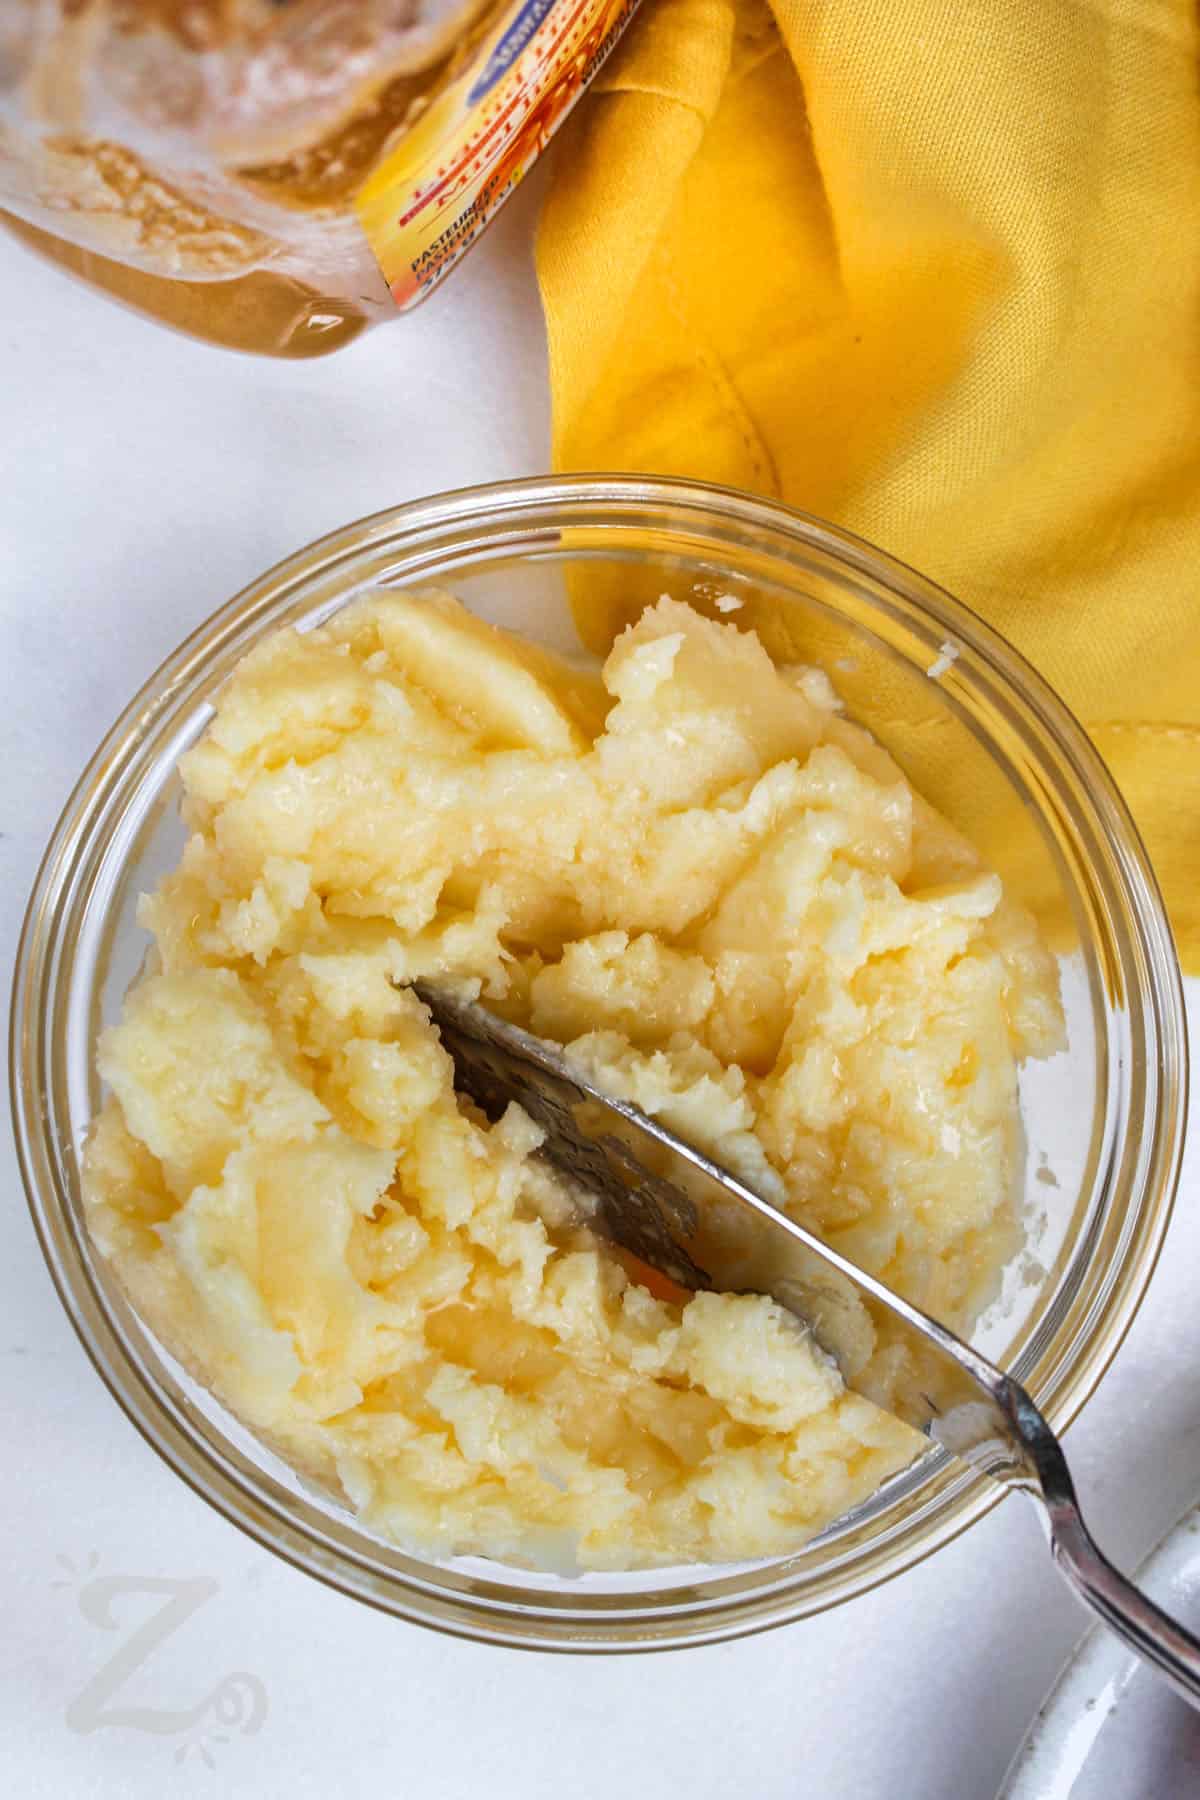 Honey Butter in a bowl with a spreading knife